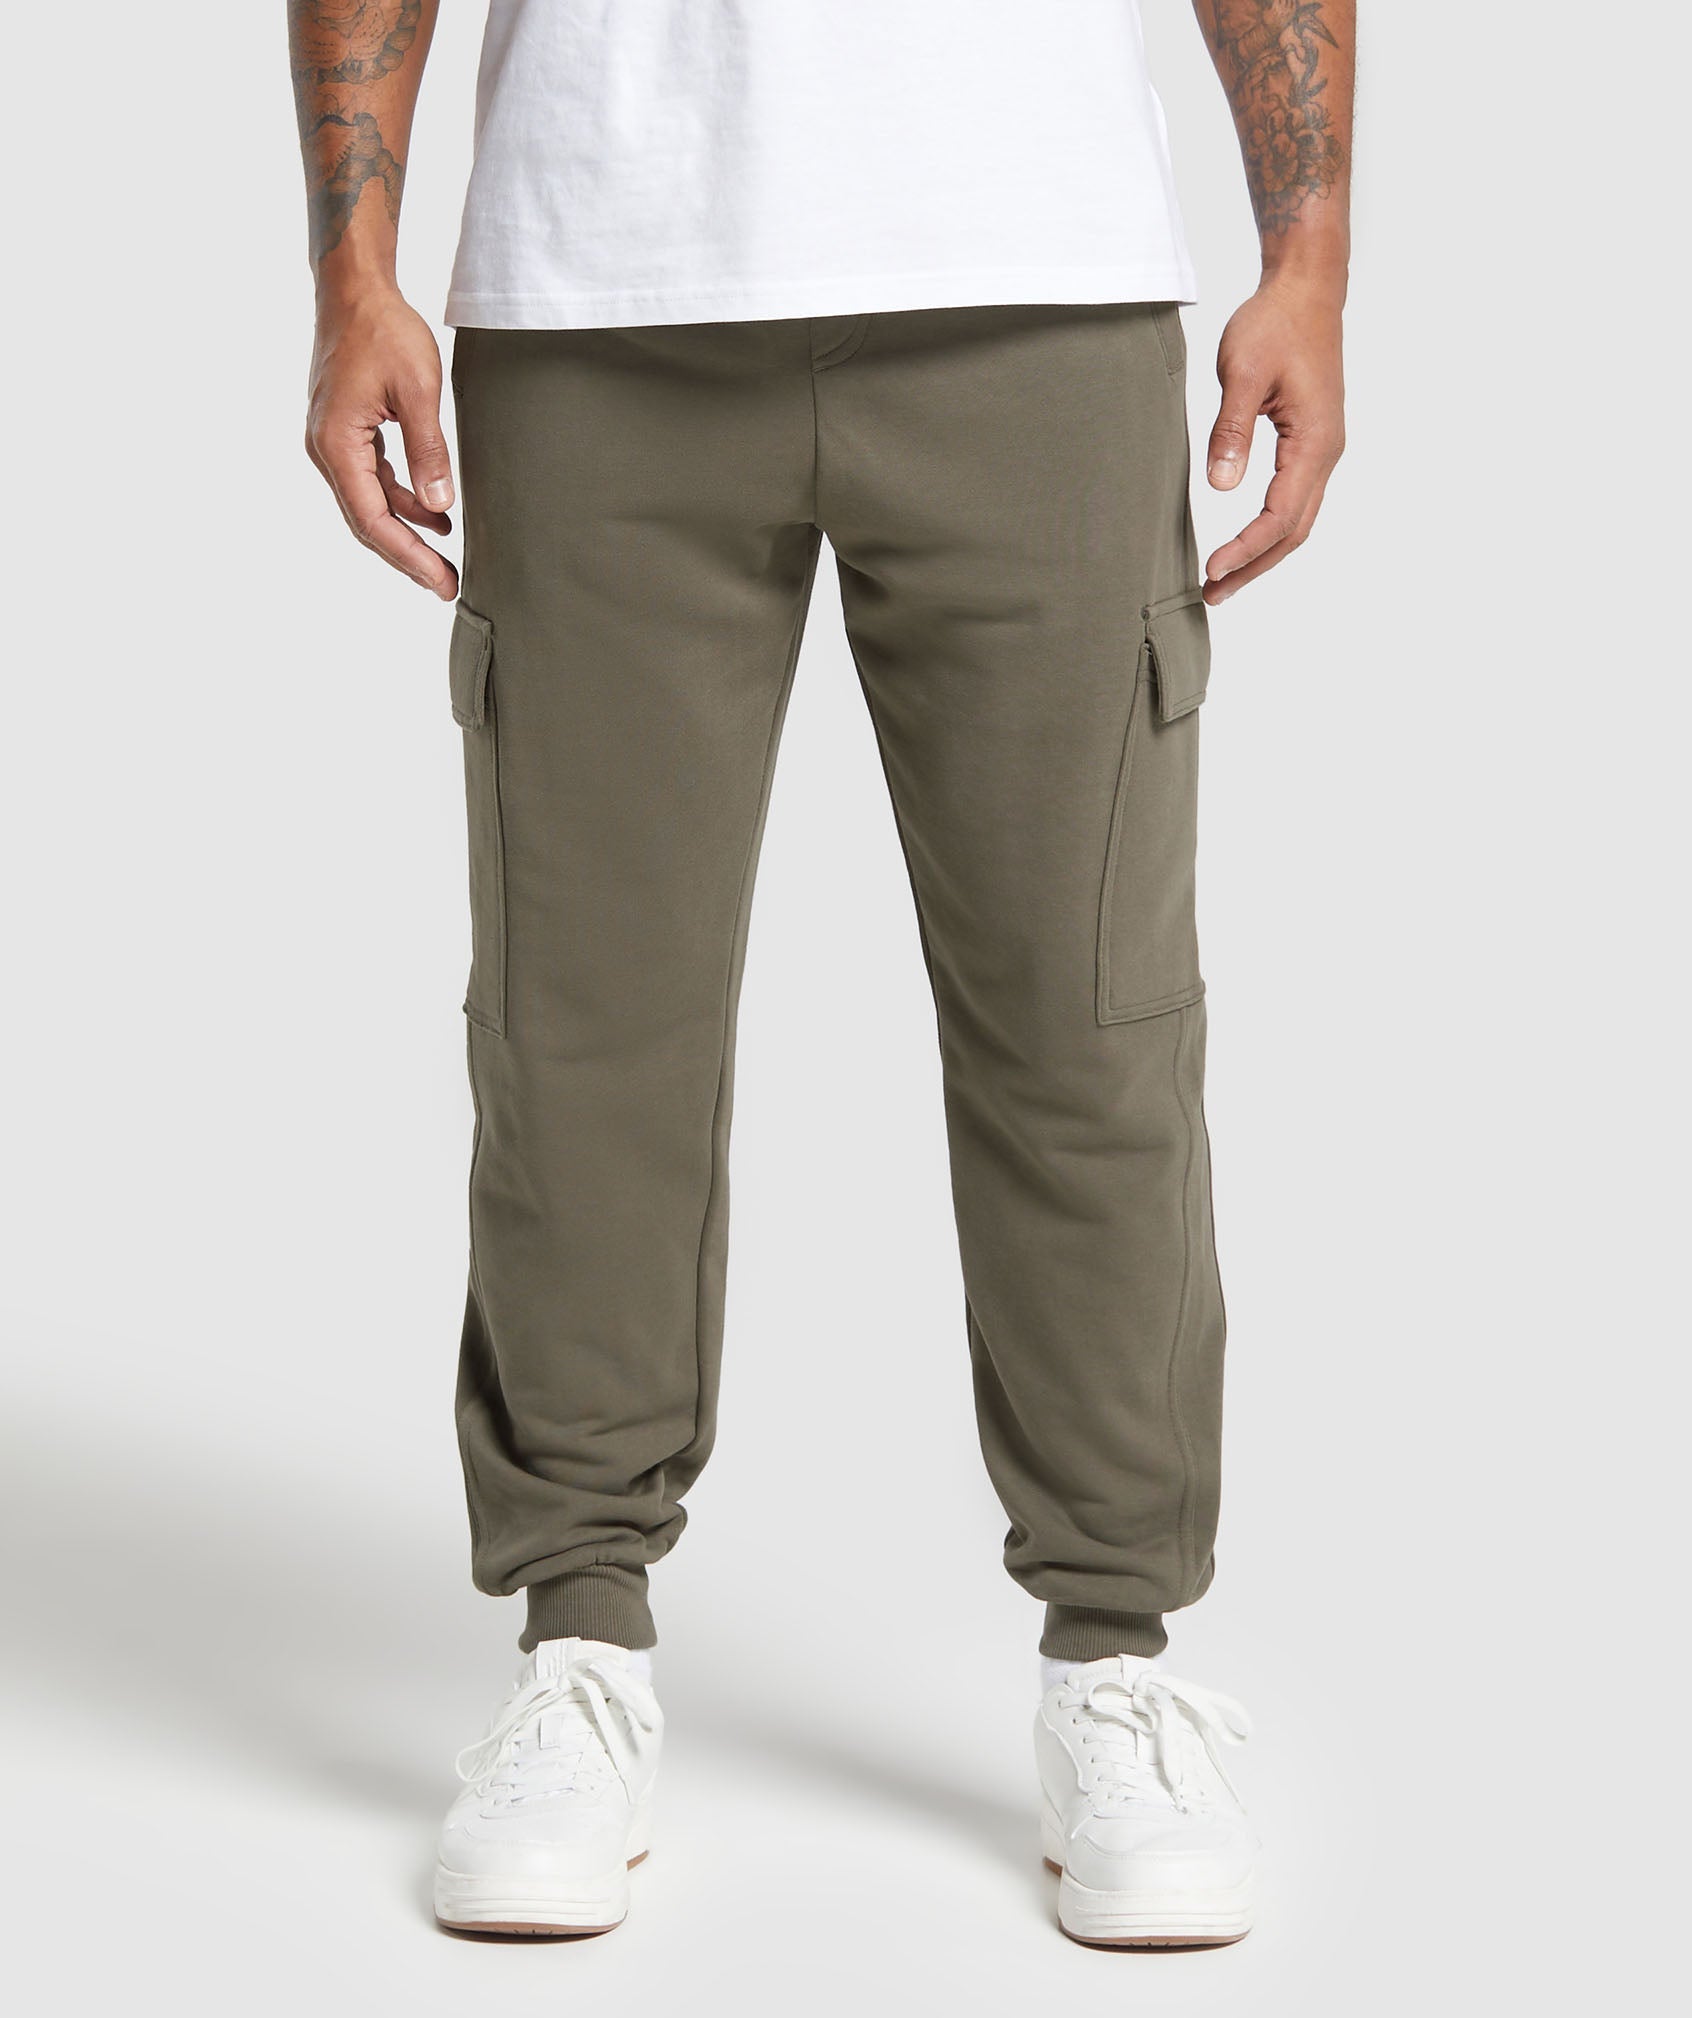 Rest Day Essentials Cargo Joggers in Camo Brown - view 1